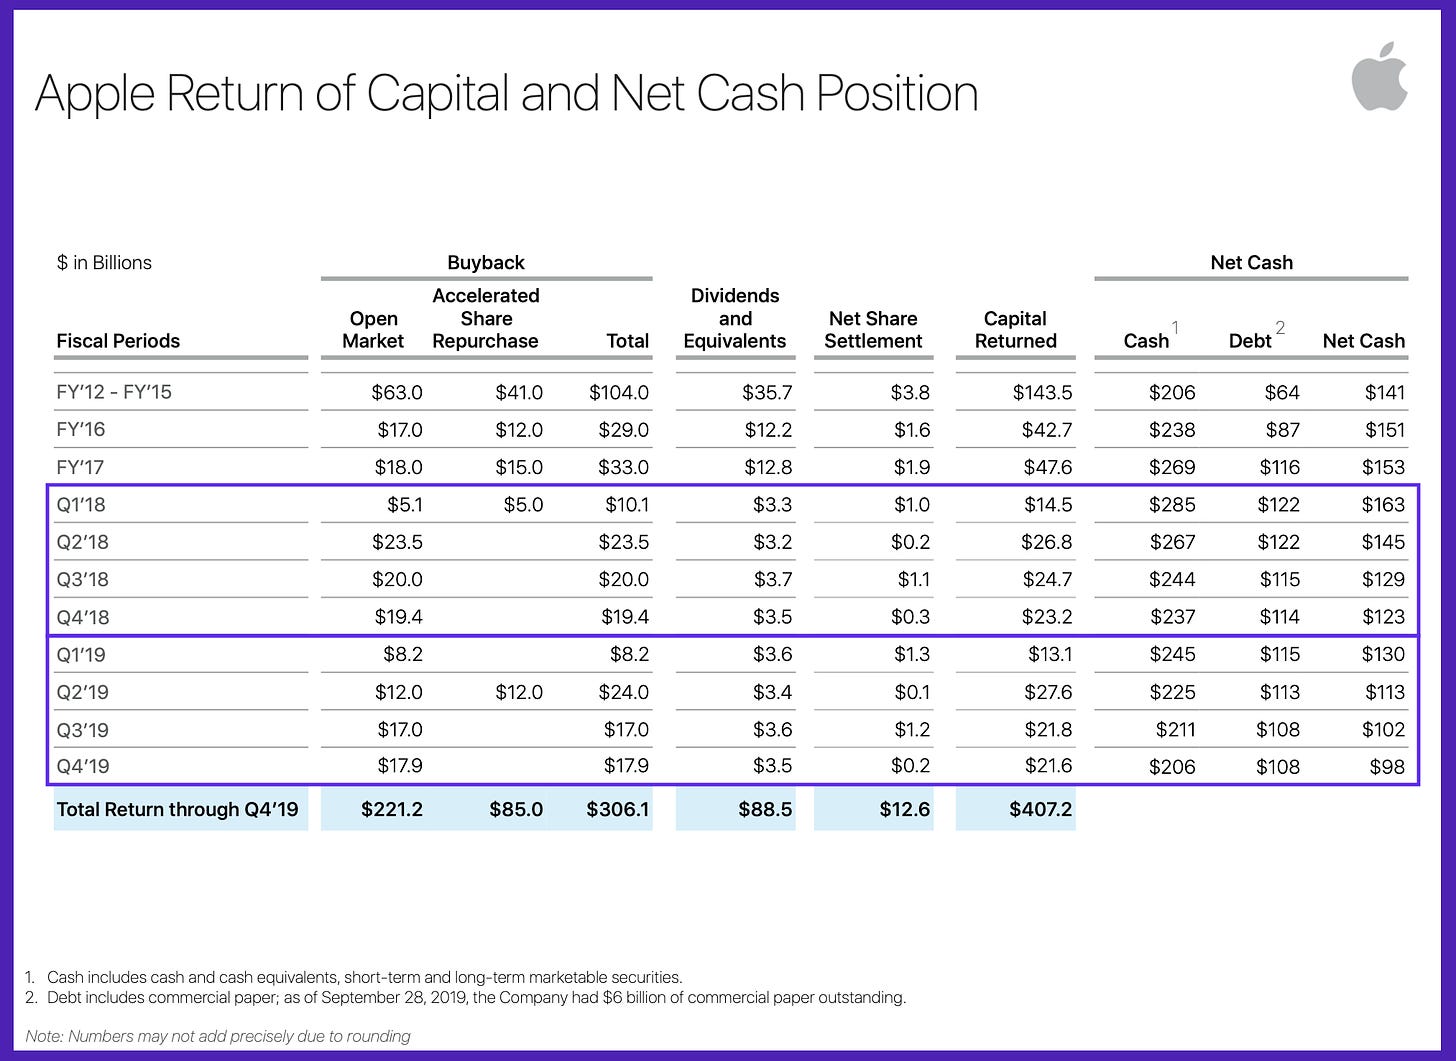 Apple Return of Capital and Net Cash position